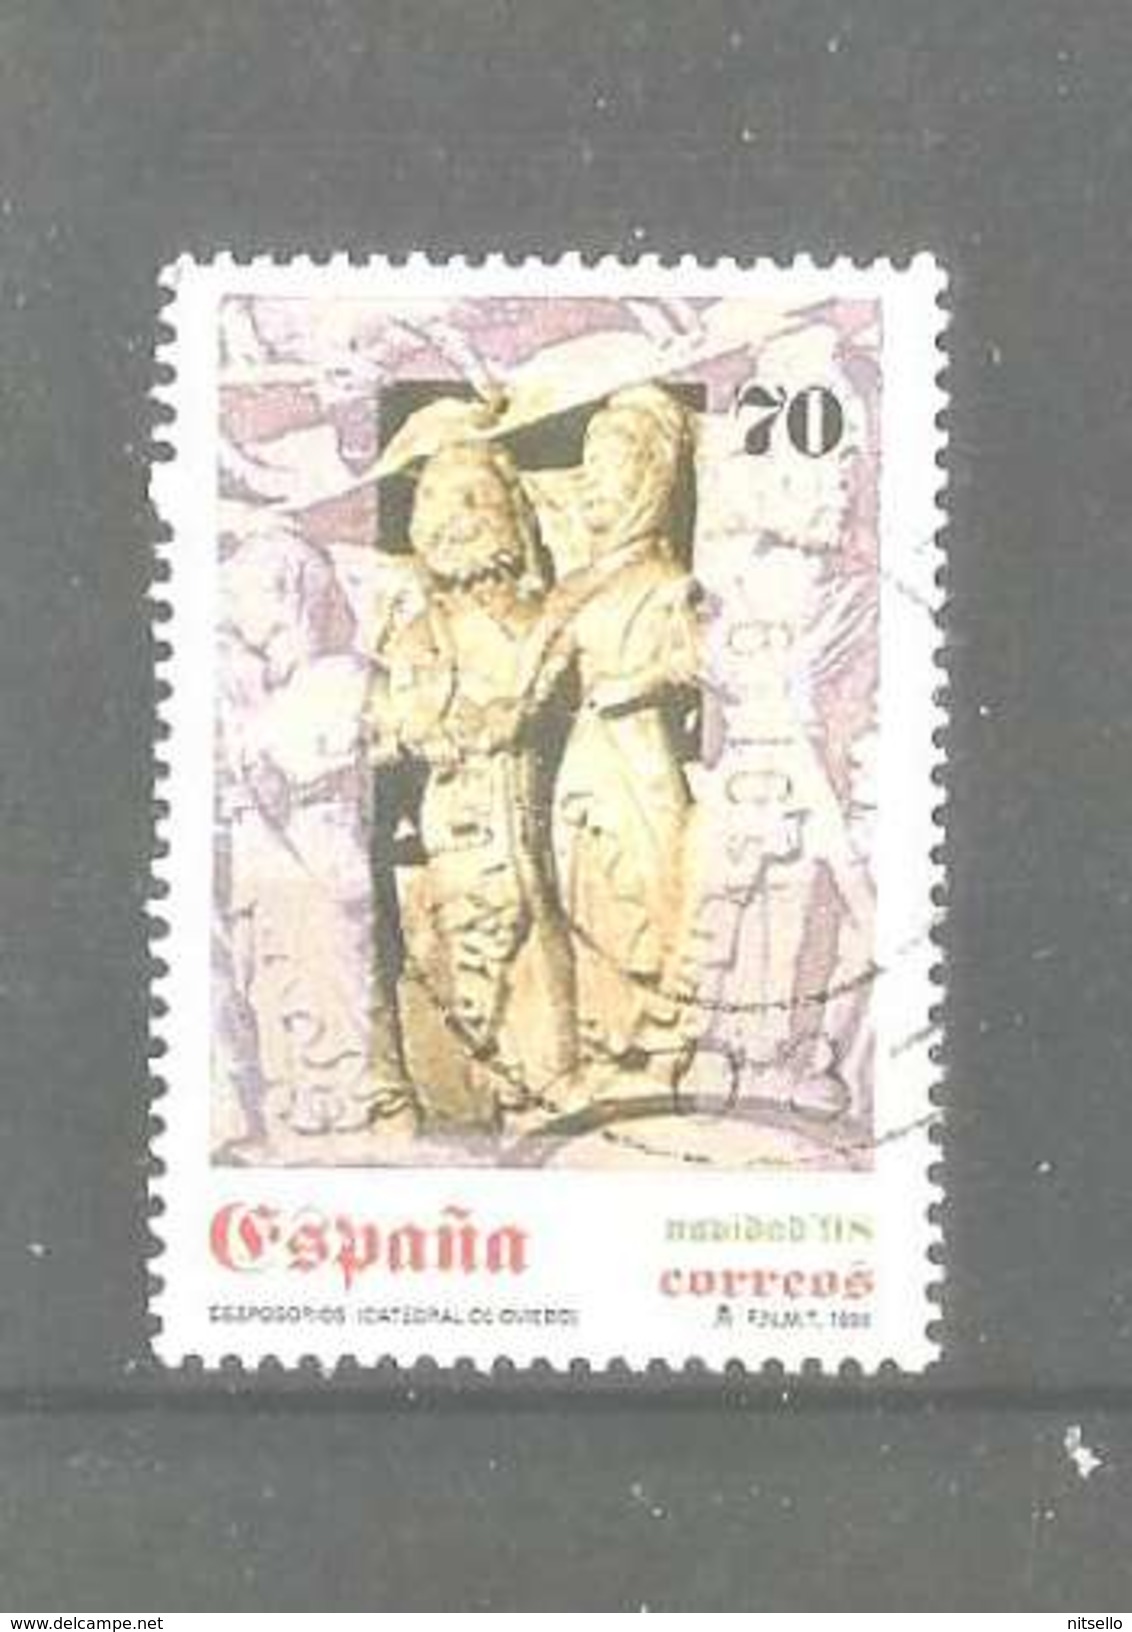 LOTE 1227  ///  (C017) ESPAÑA 1998 - Used Stamps